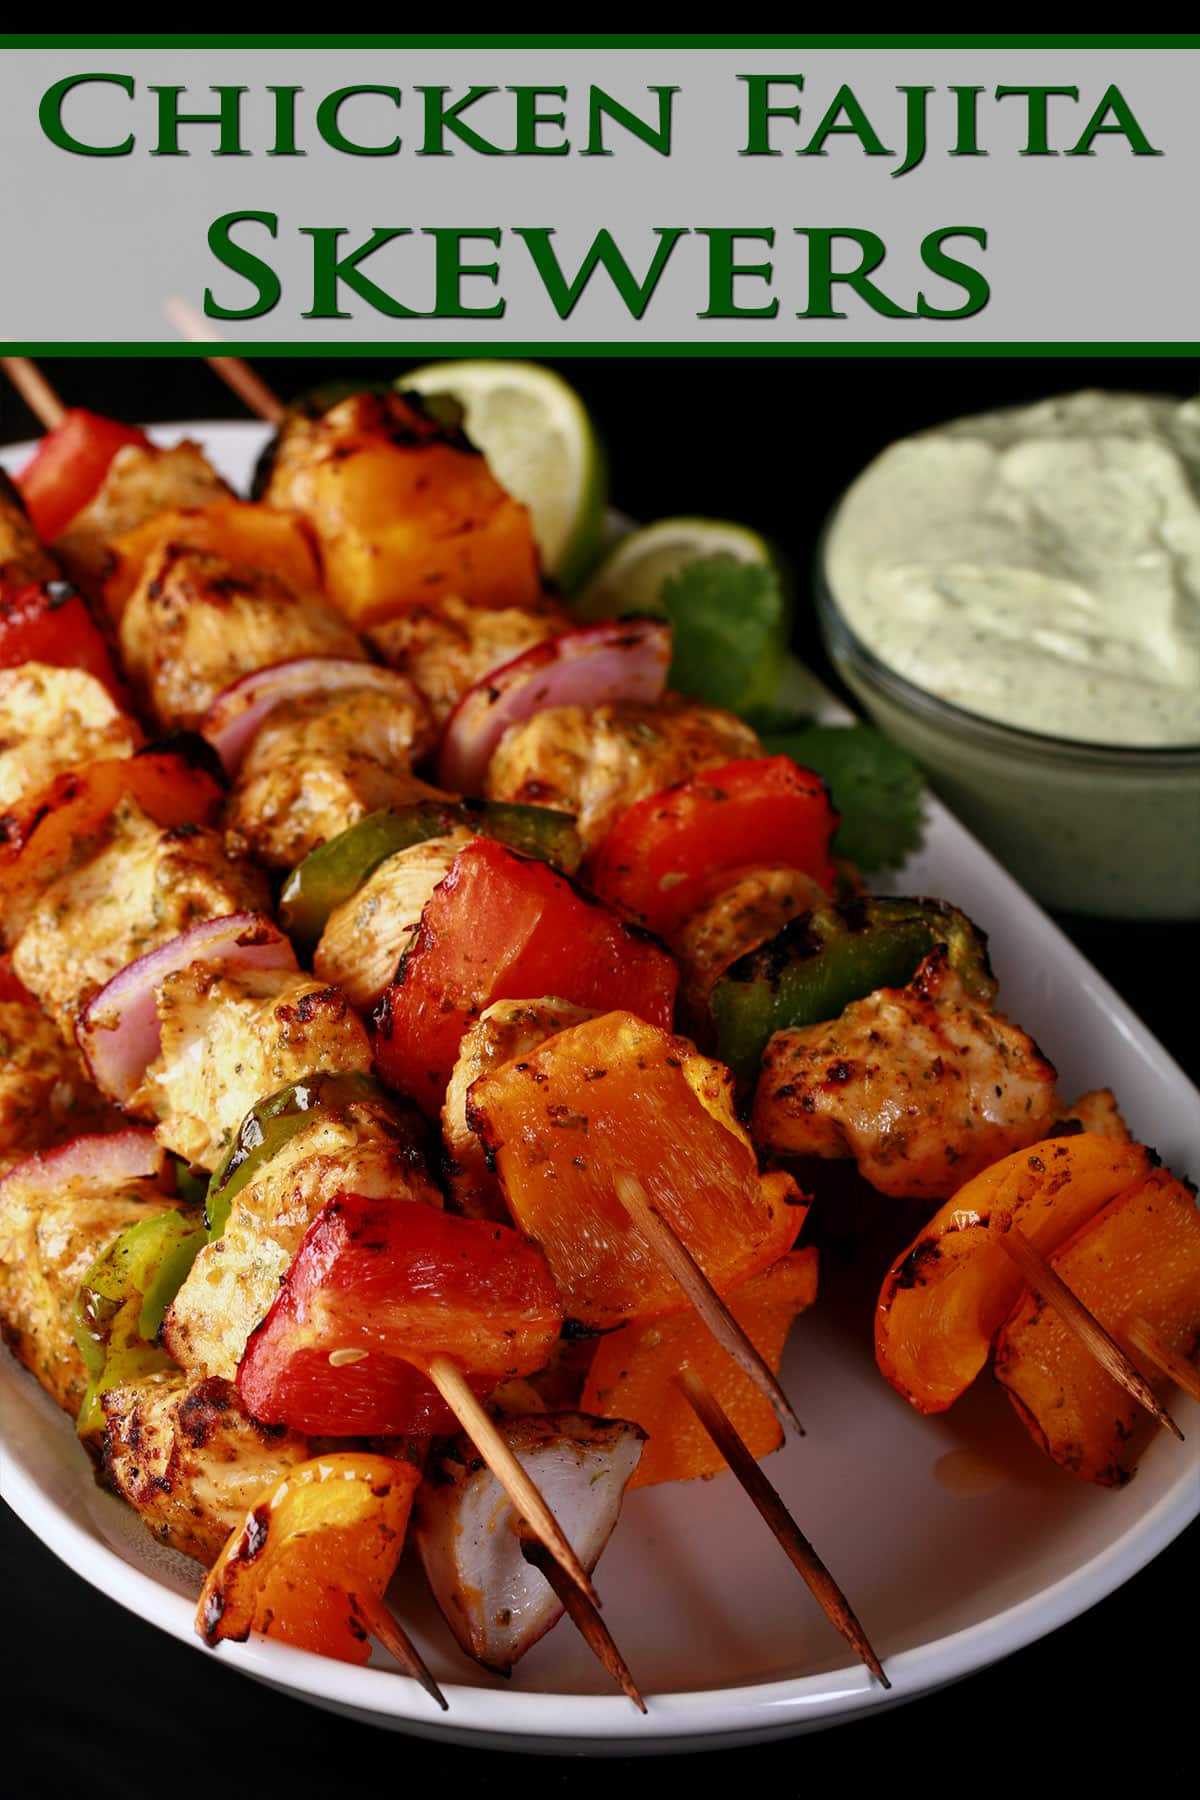 A tray of fajita chicken skewers with a bowl of avocado crema next to it.